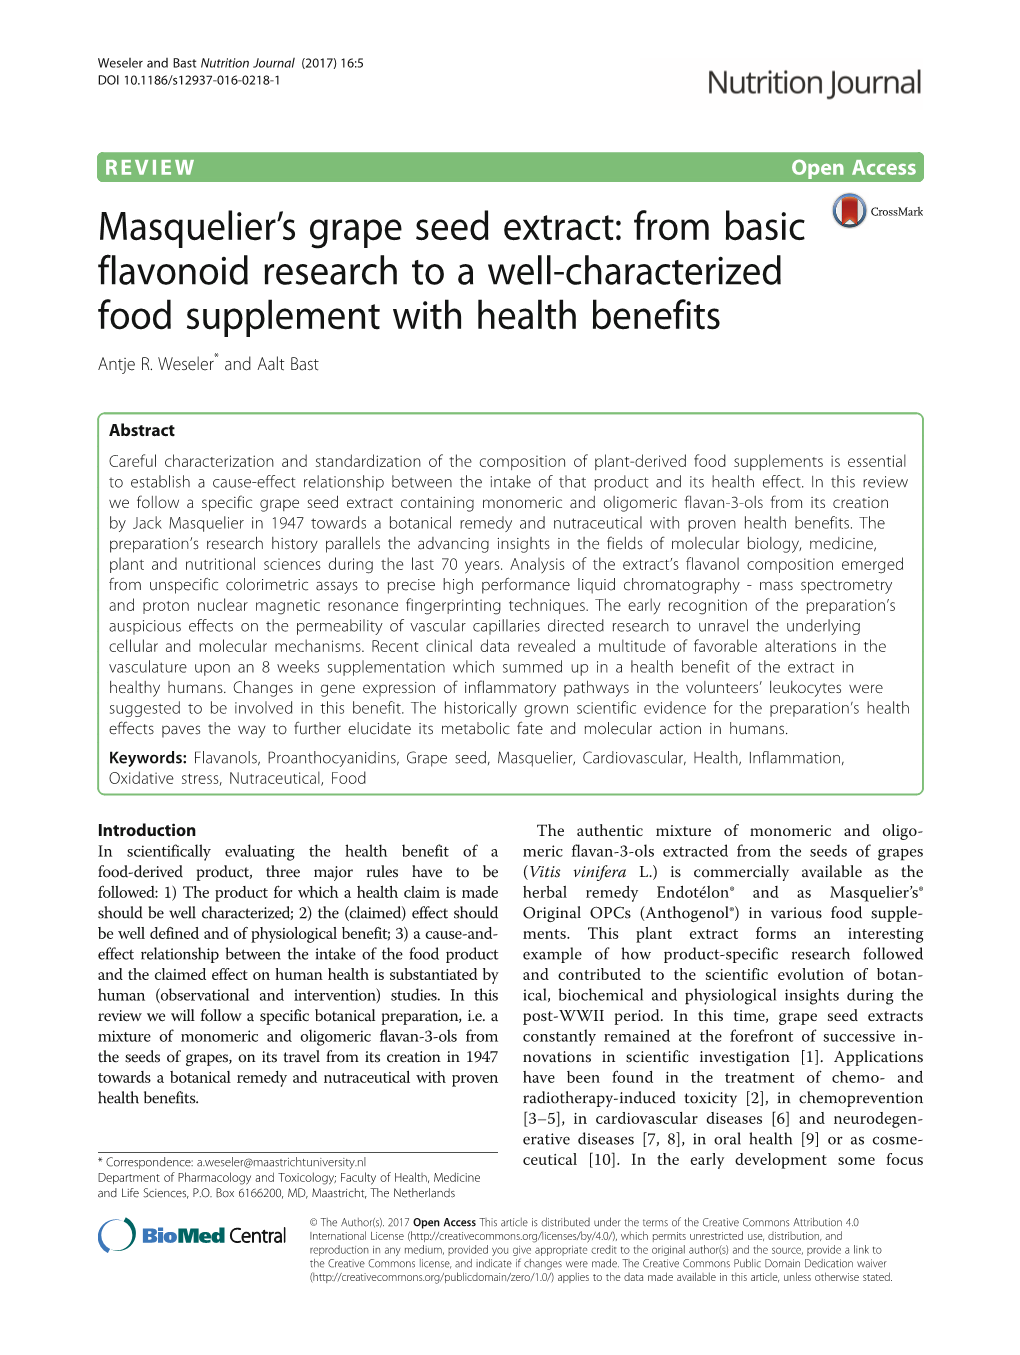 Masquelier's Grape Seed Extract: from Basic Flavonoid Research to a Well